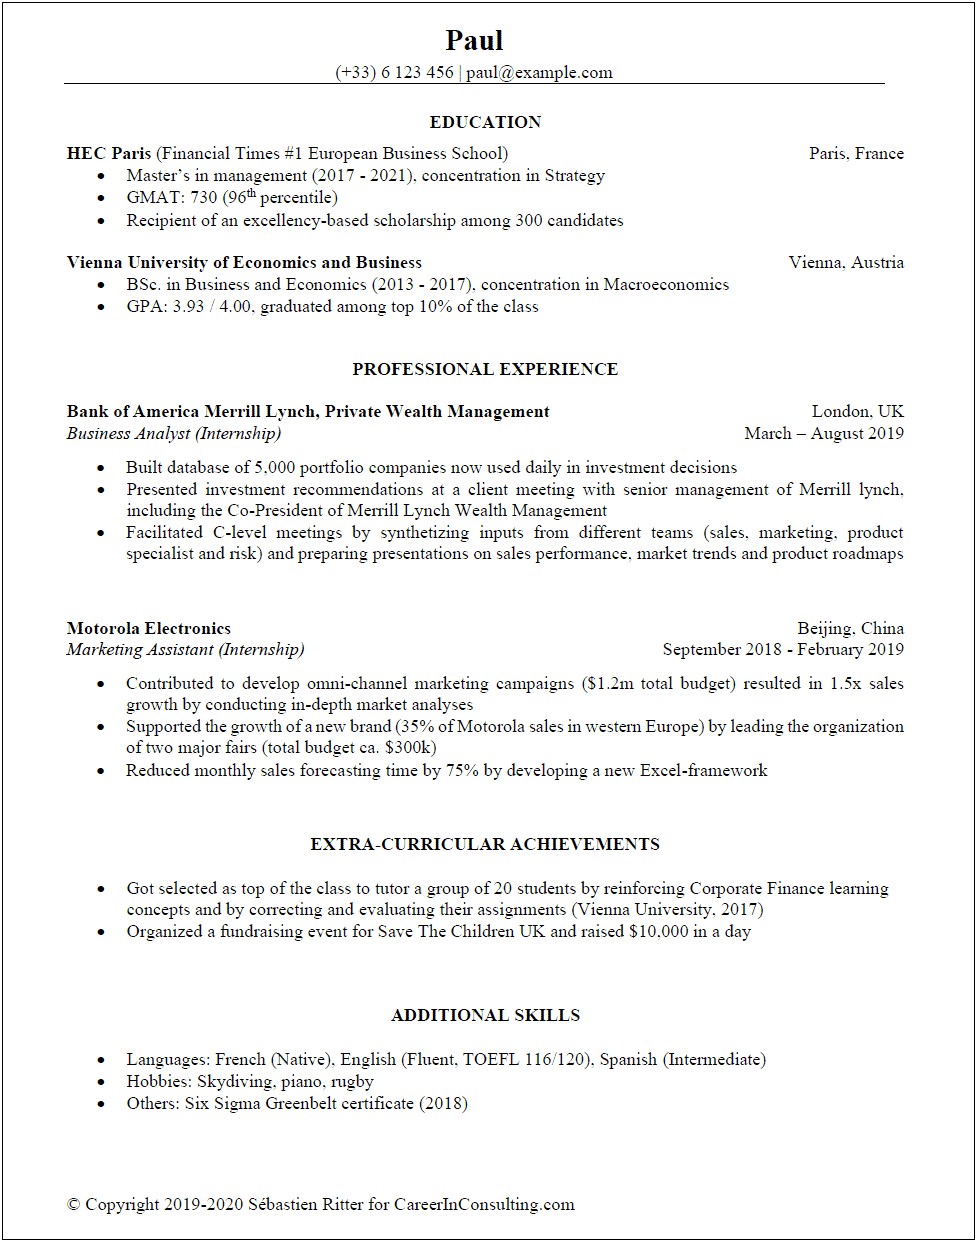 Resume Sample For Strategy Consultant